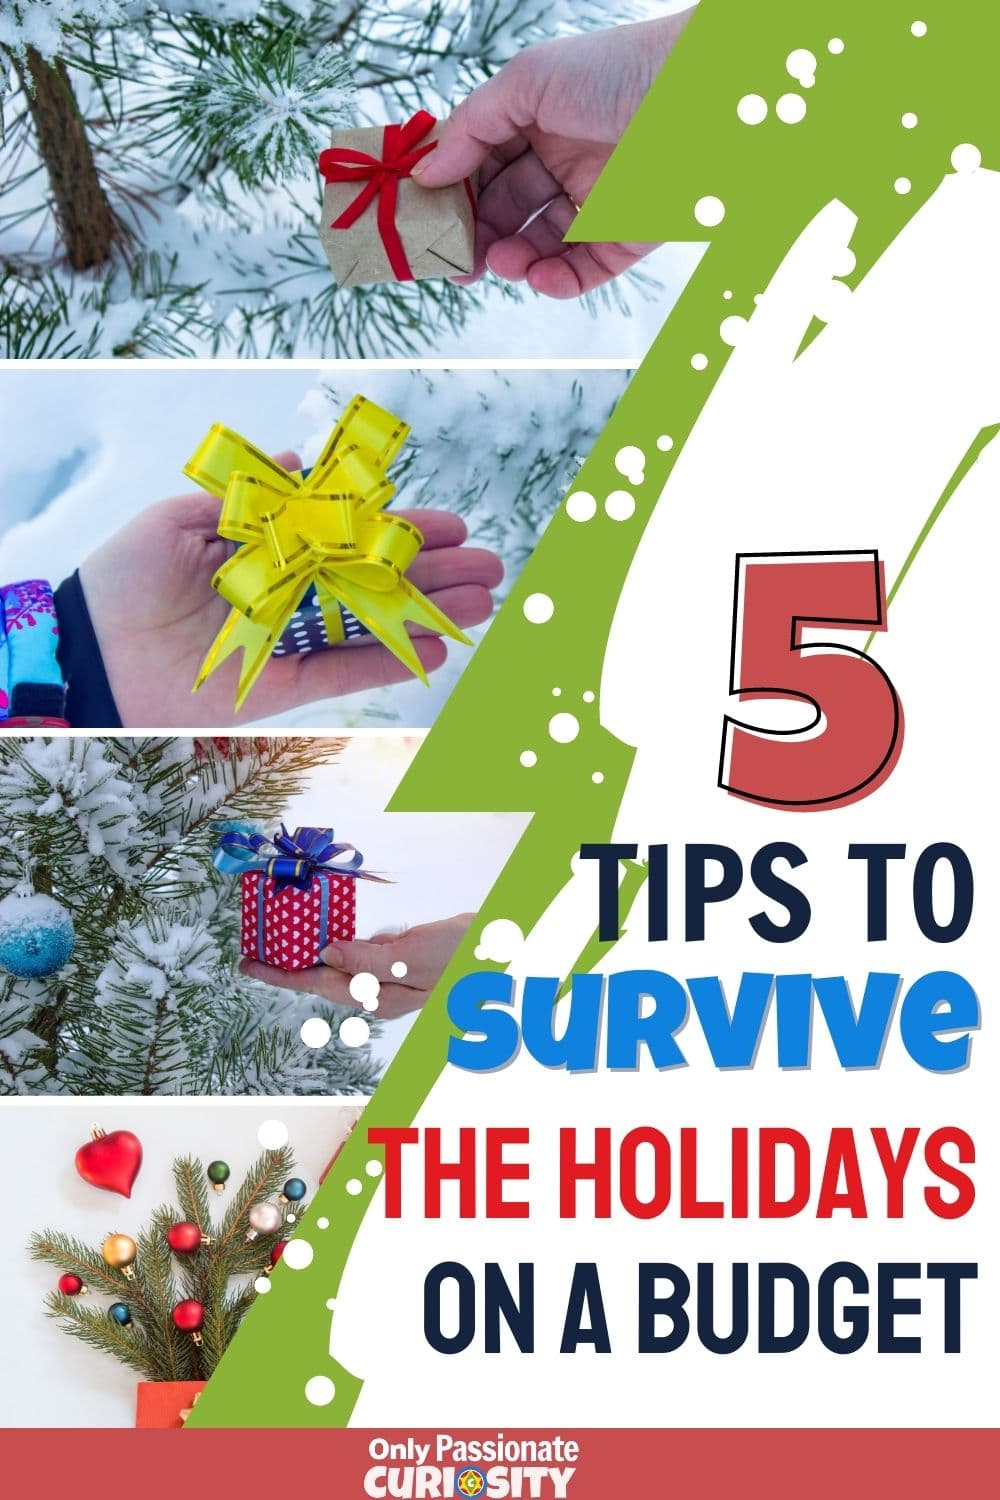 It's almost the holiday season! Are you ready for it? Or are you feeling a little bit anxious about your holiday budget and how much you are about to spend this Christmas? Here are some tips on surviving holidays on a budget.